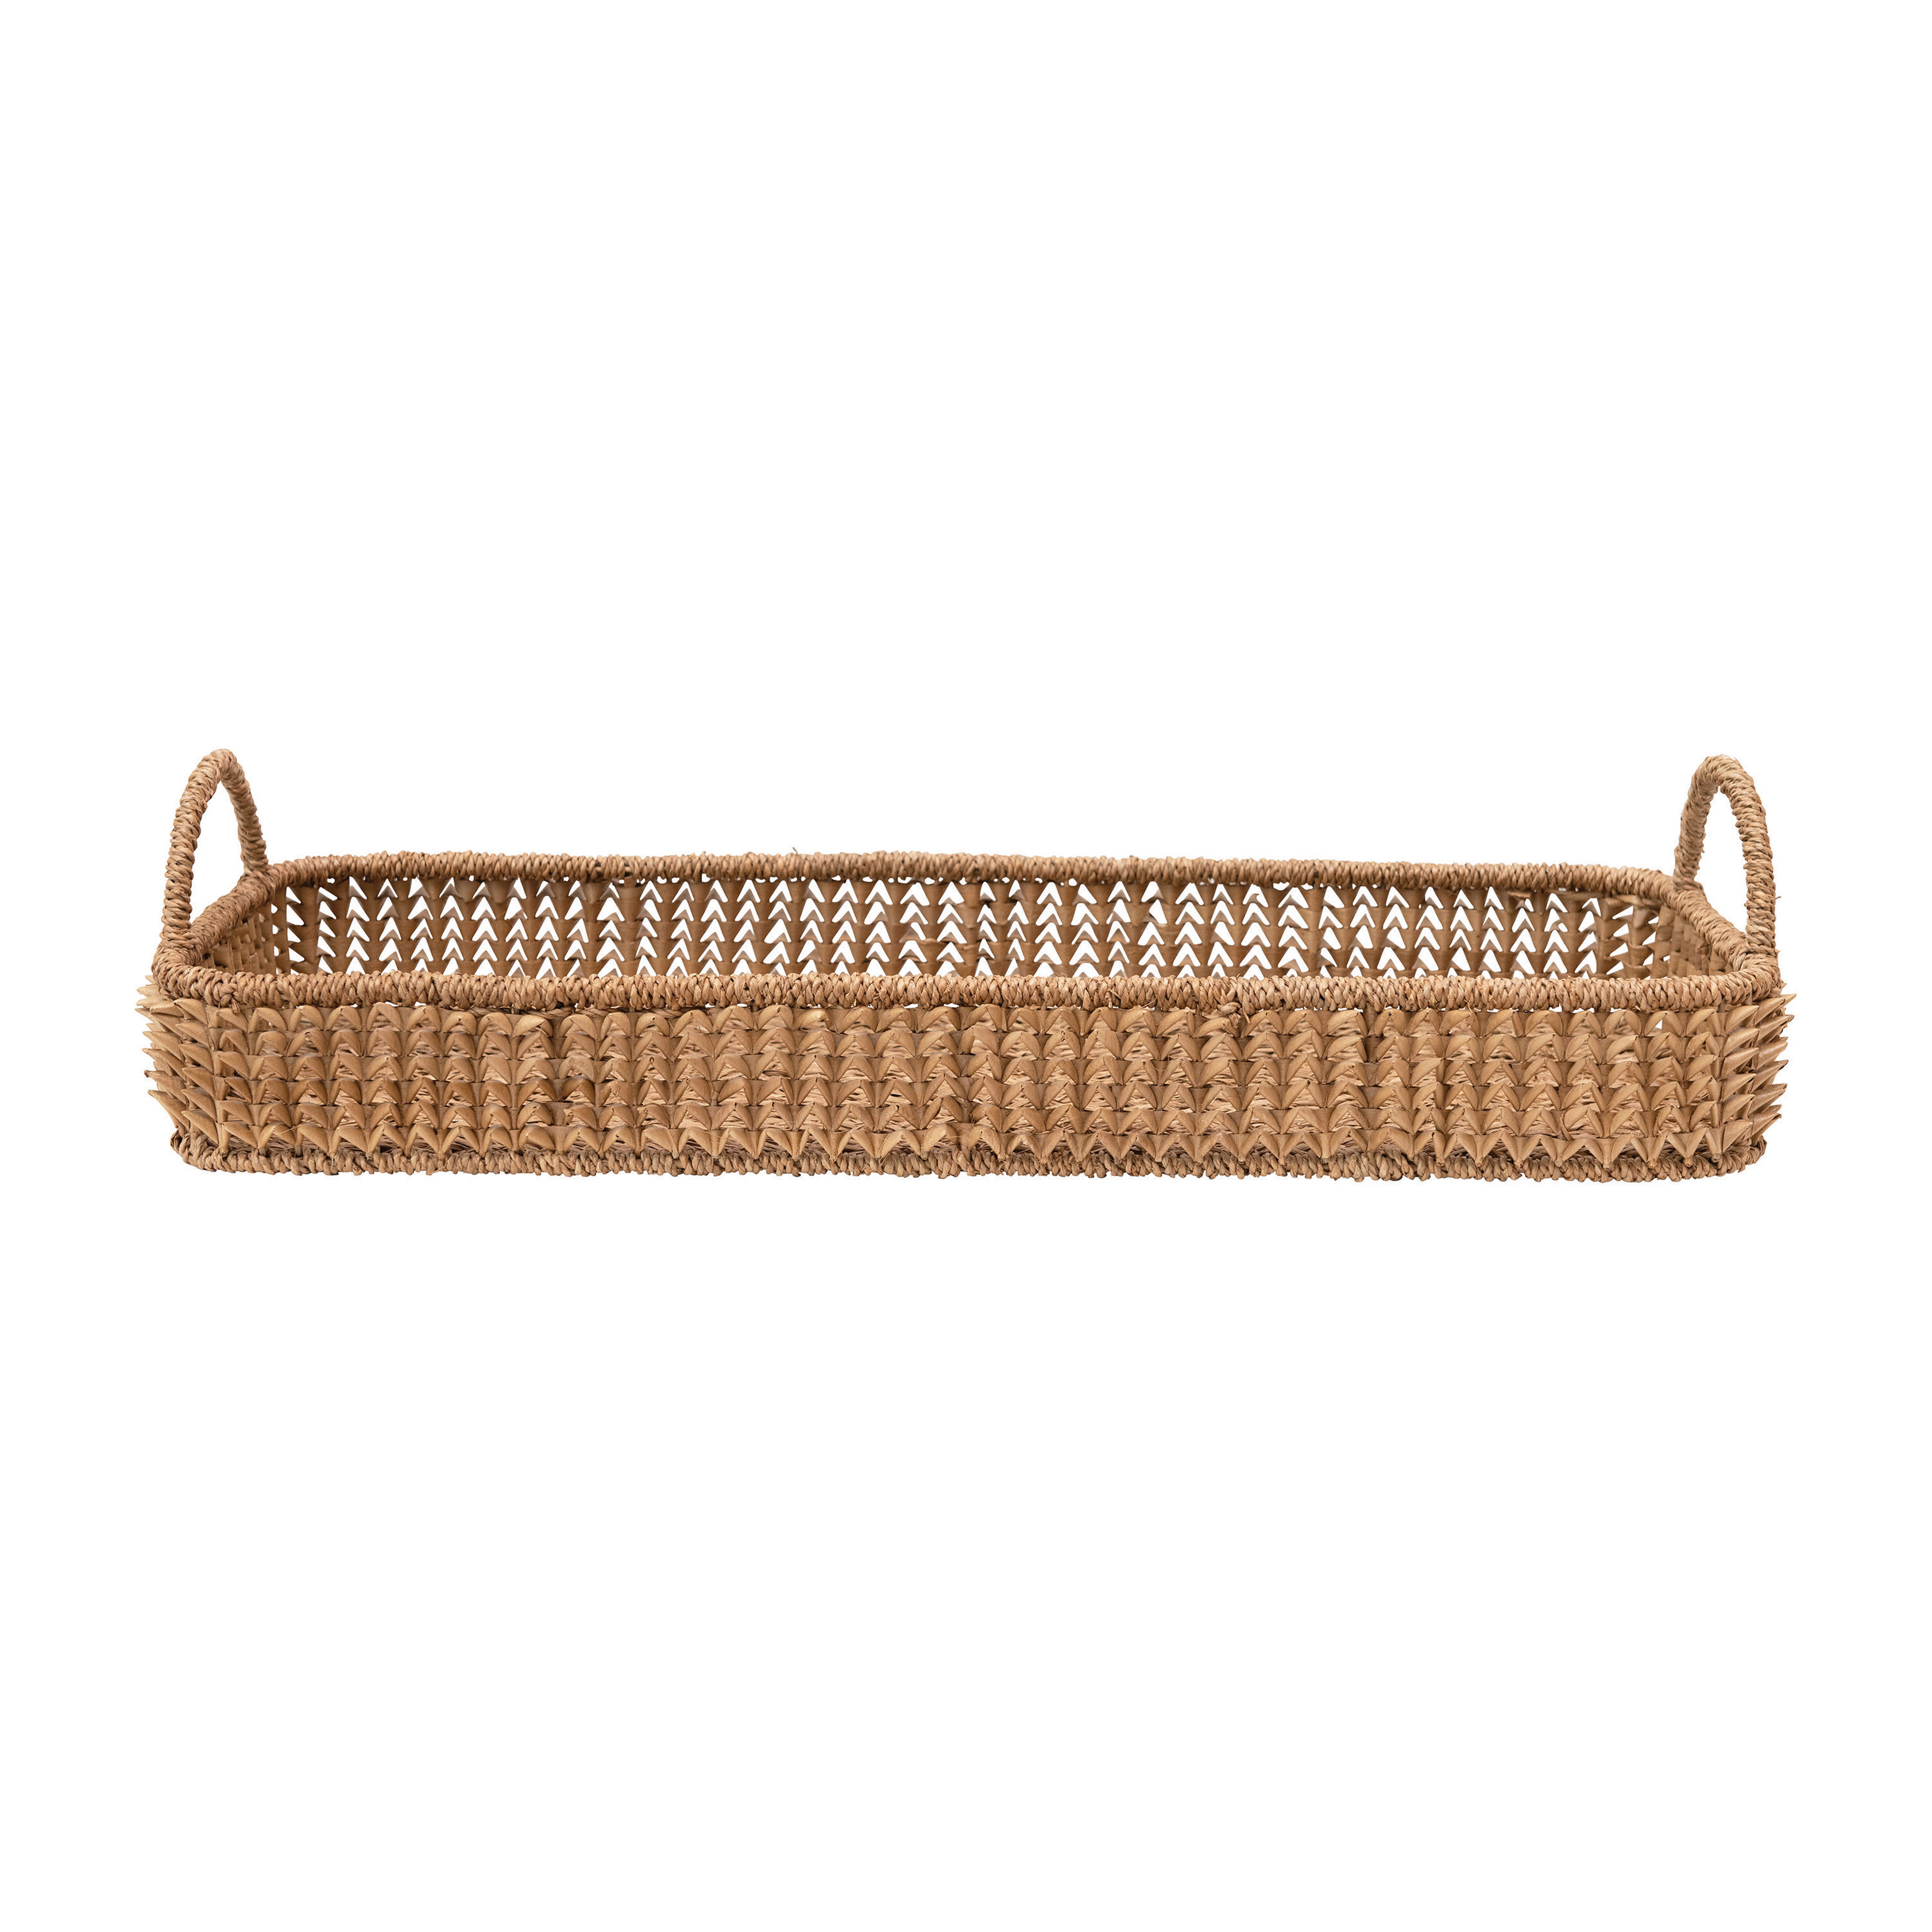 Decorative Hand-Woven Buri Palm Tray with Handles, Natural - Nomad Home